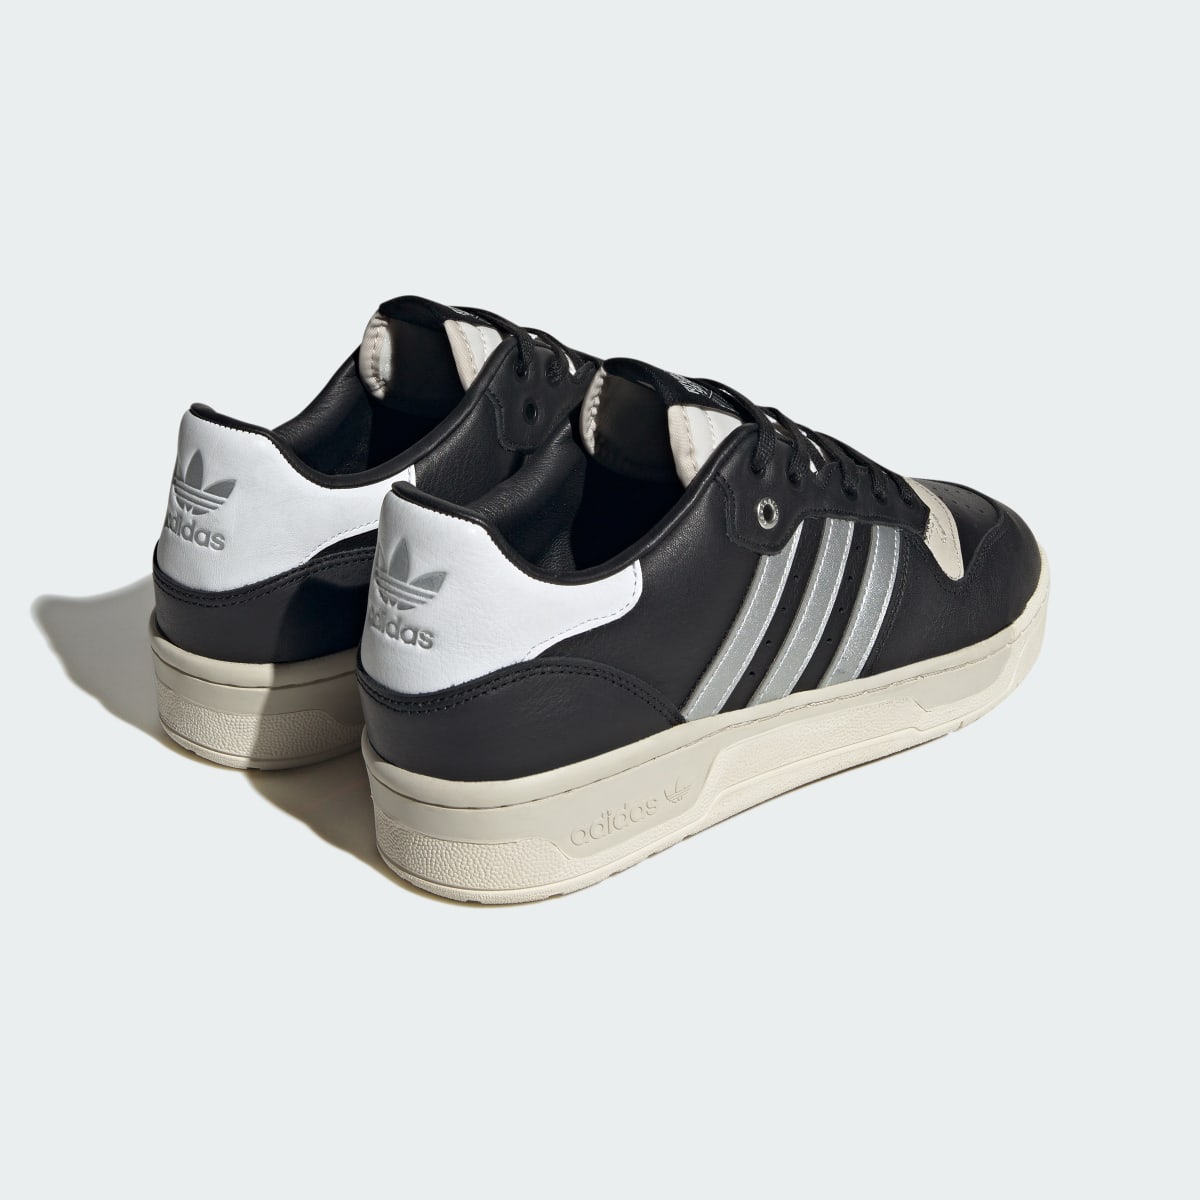 Adidas Rivalry Low Consortium Shoes. 6